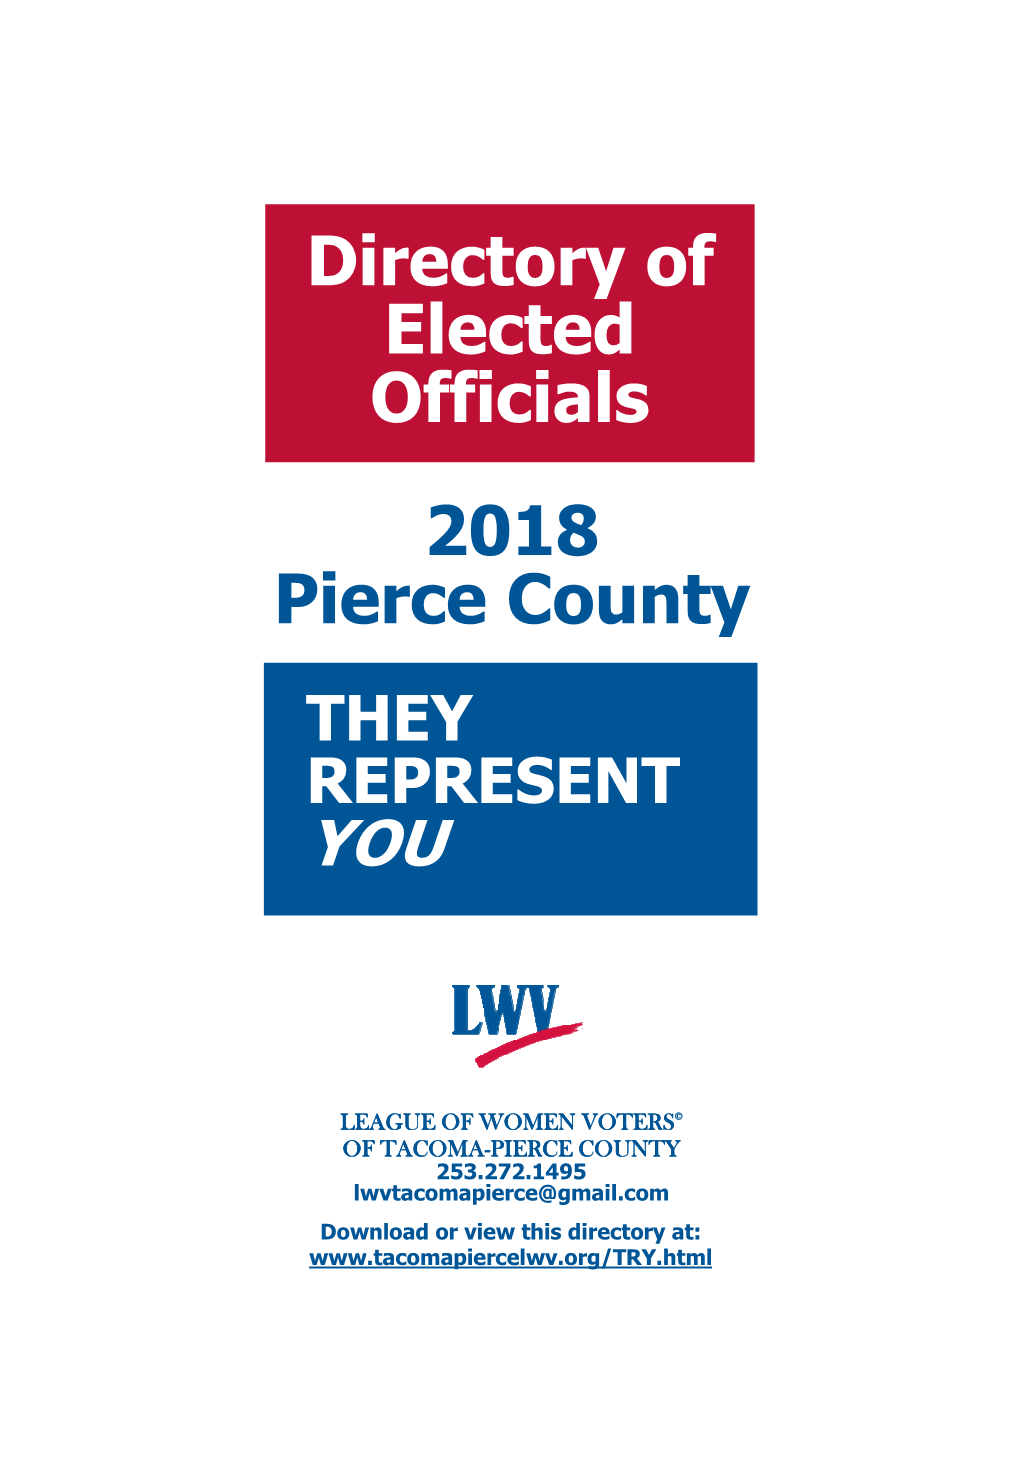 2018 Pierce County Directory of Elected Officials